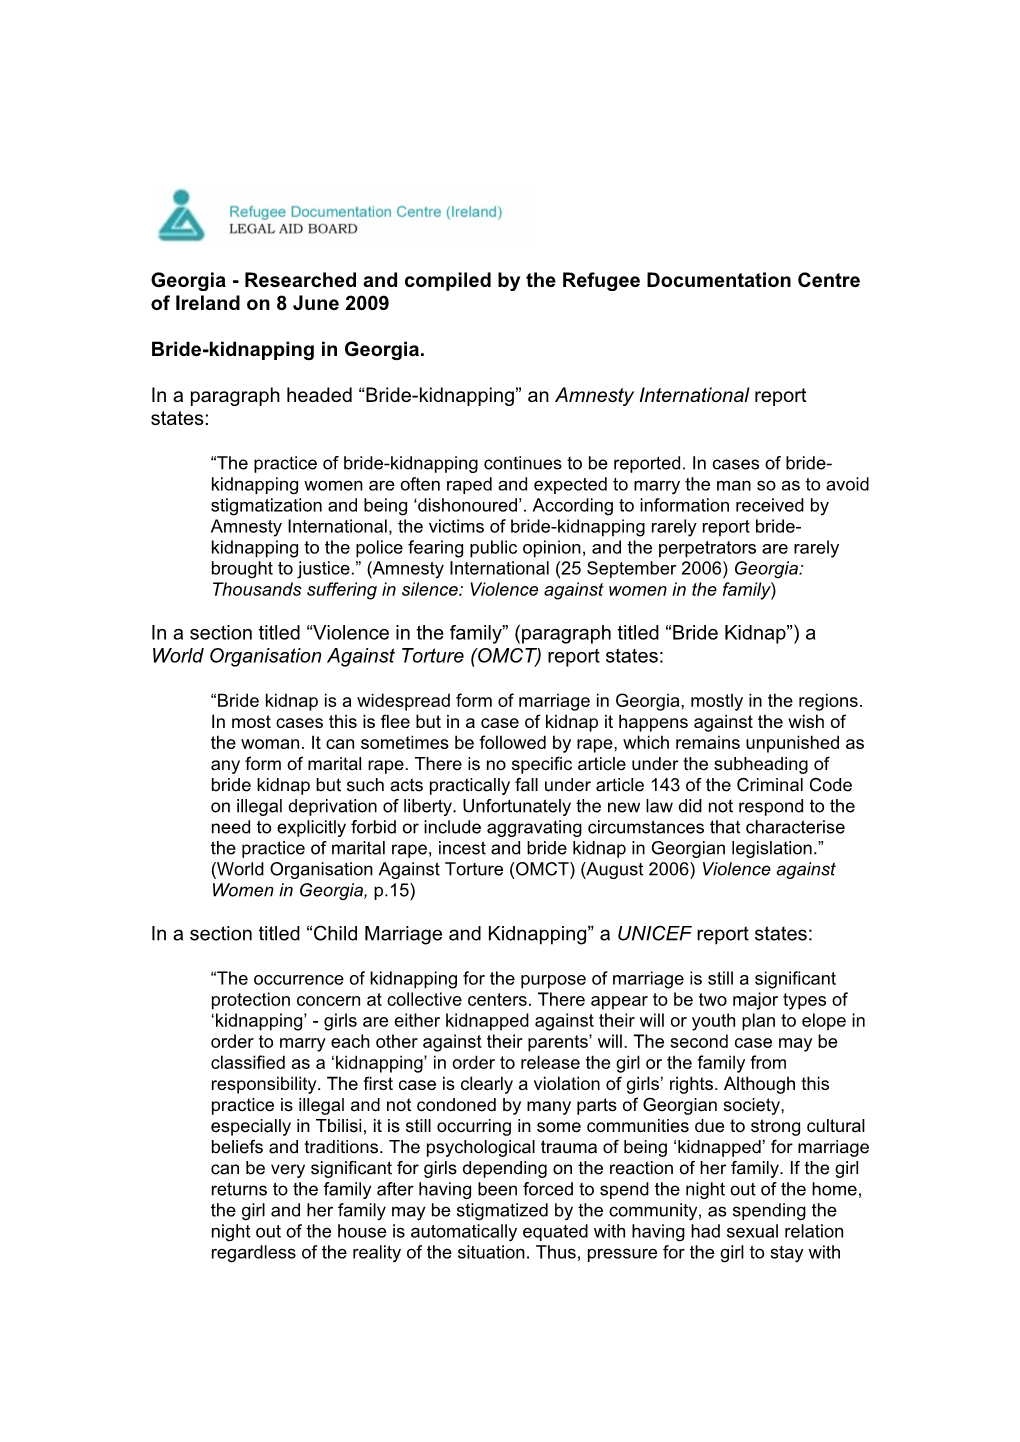 Georgia - Researched and Compiled by the Refugee Documentation Centre of Ireland on 8 June 2009